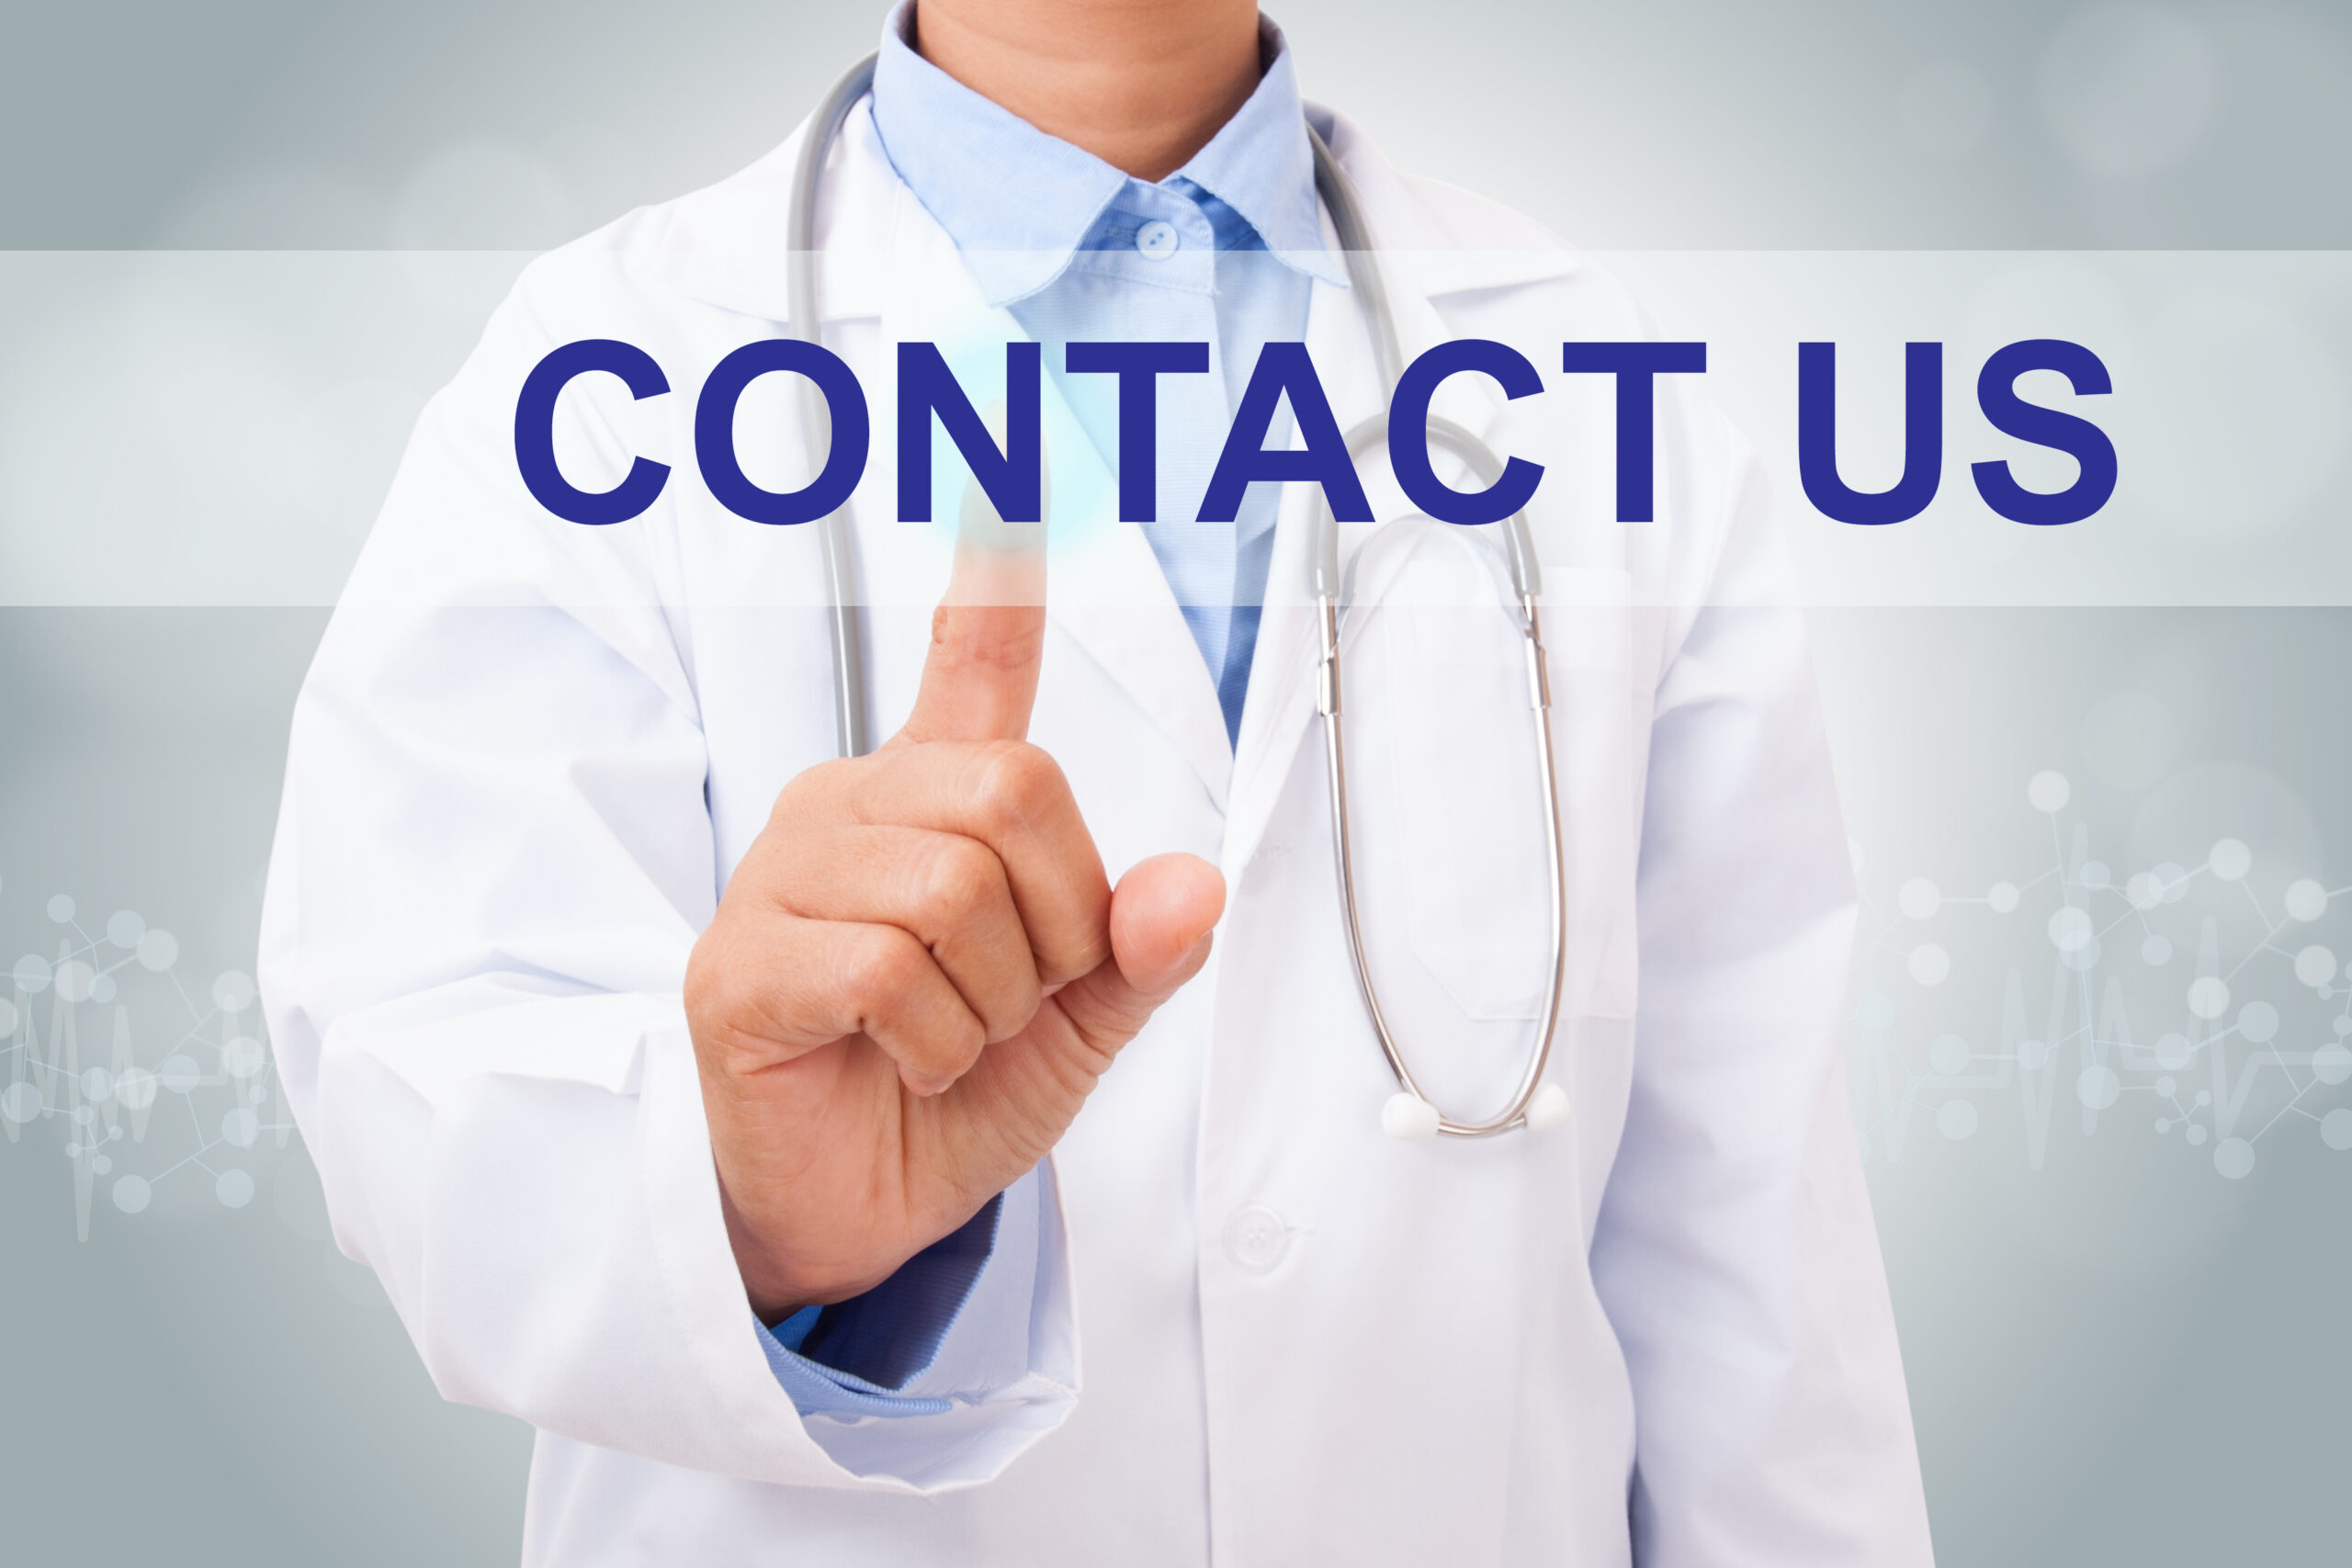 doctor touching contact us sign